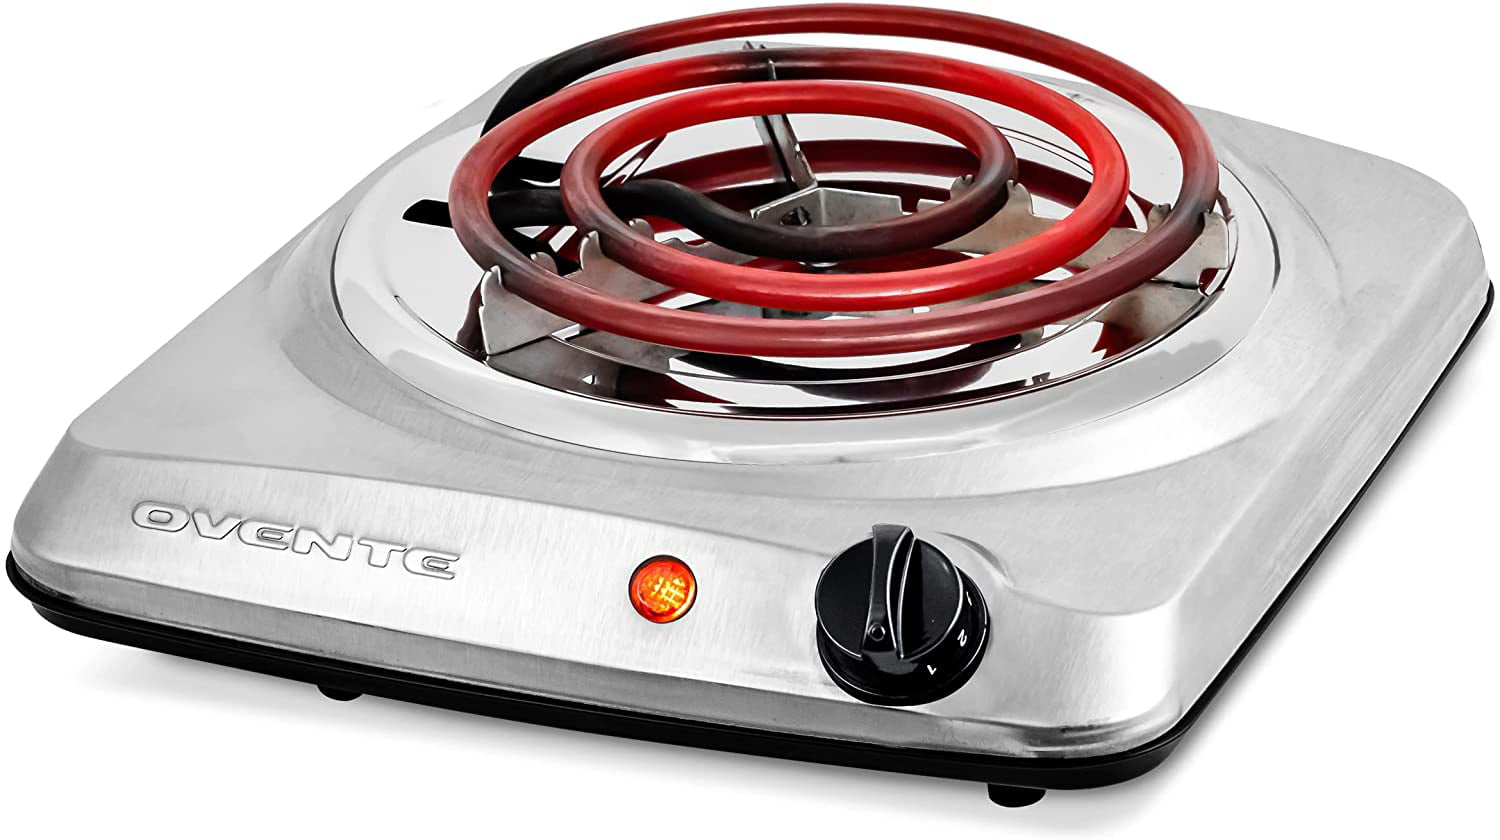 Commercial Induction Burner Electric Portable Countertop Cooktop Cooker 1000W. 